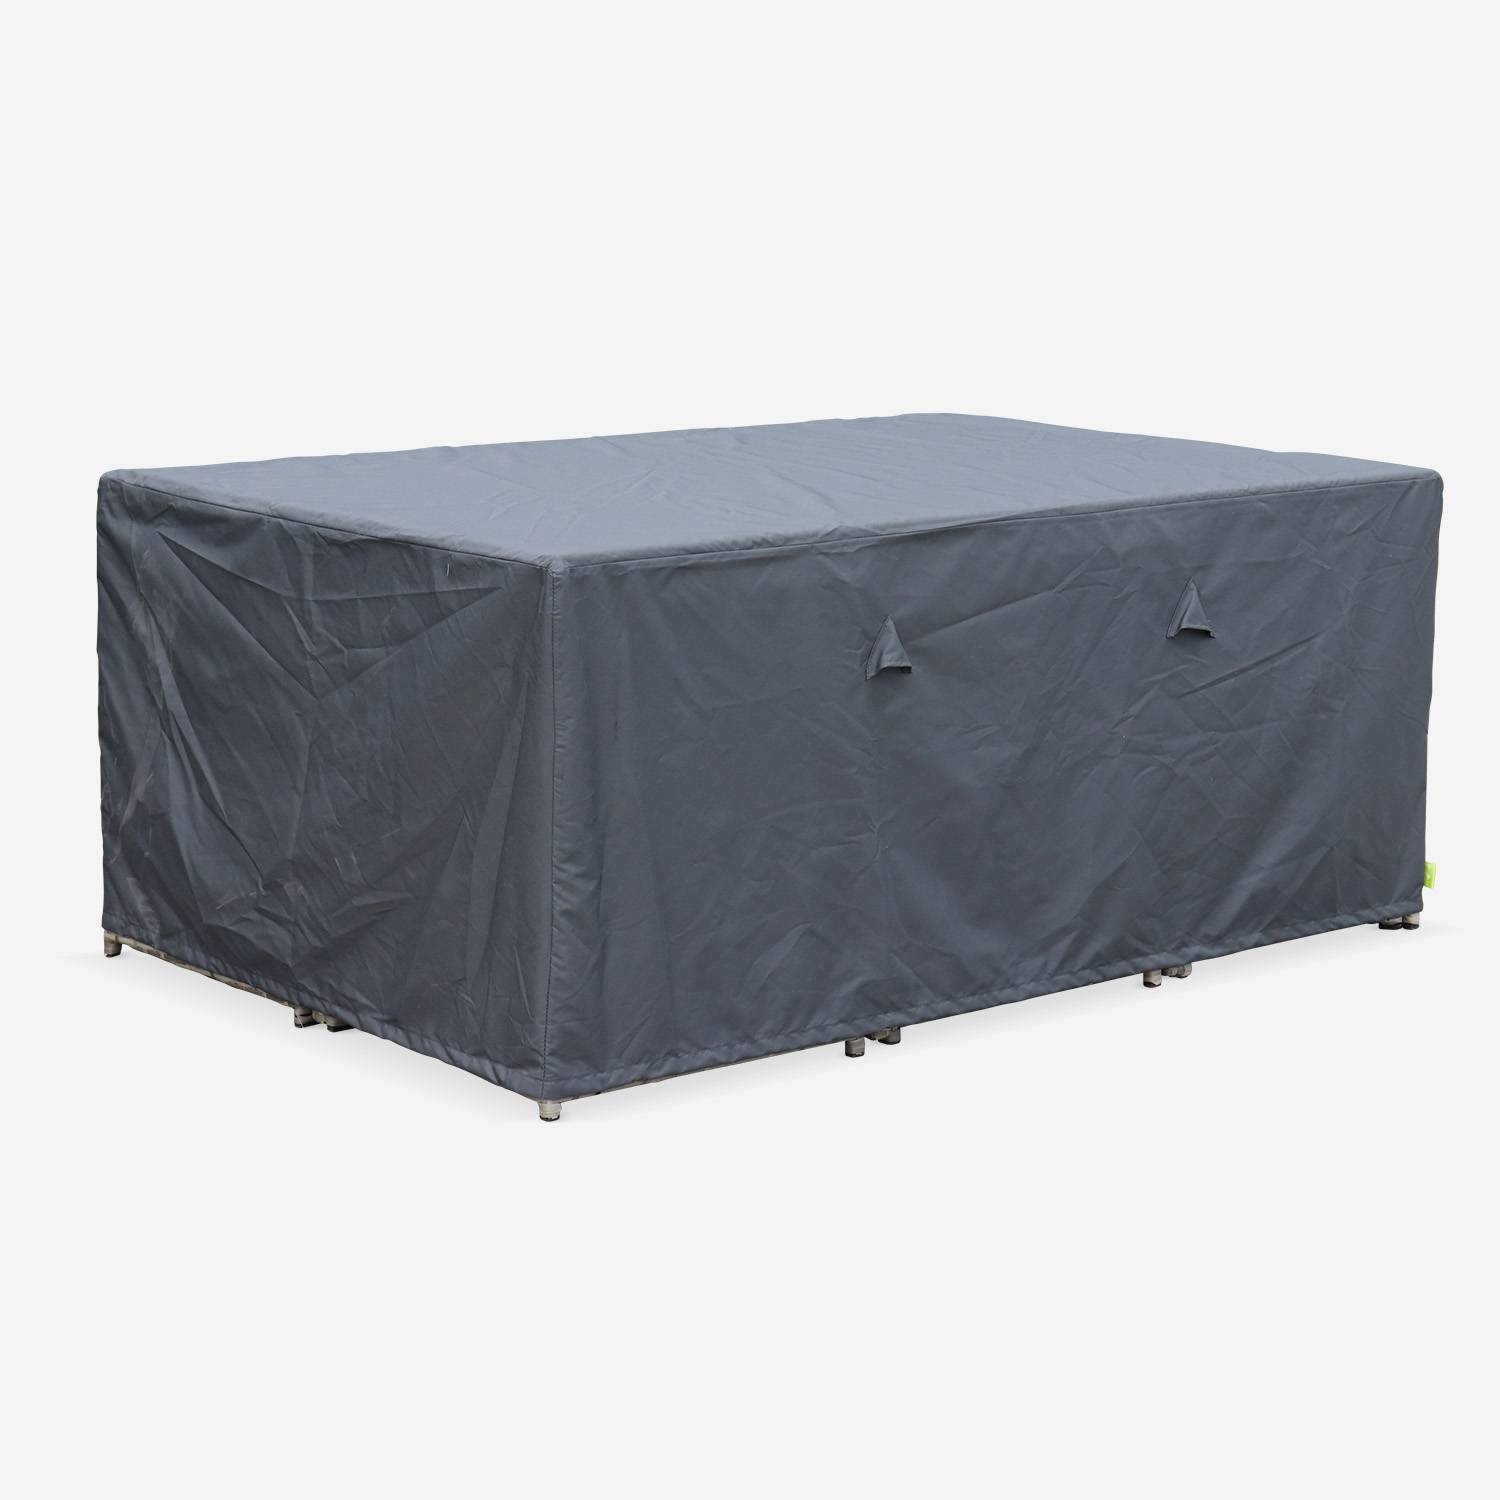 172x112cm dark grey dust cover - Rectangular, PA-coated polyester dust cover for the Vabo 10 garden tables Photo1